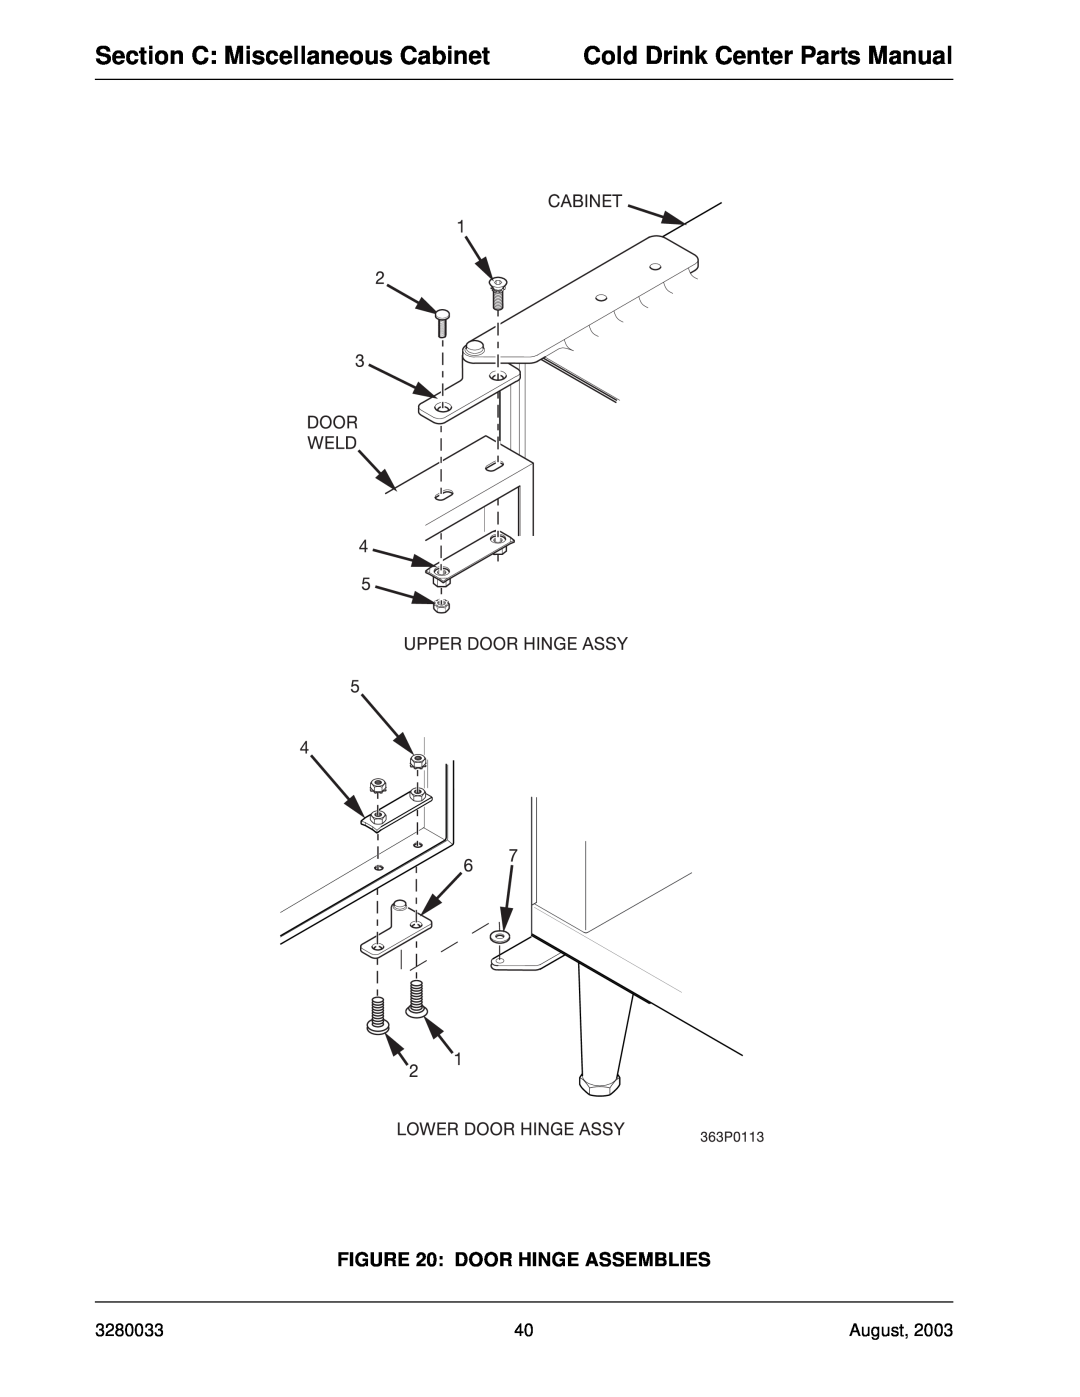 Crane Merchandising Systems 328 Section C Miscellaneous Cabinet, Cold Drink Center Parts Manual, Door Hinge Assemblies 